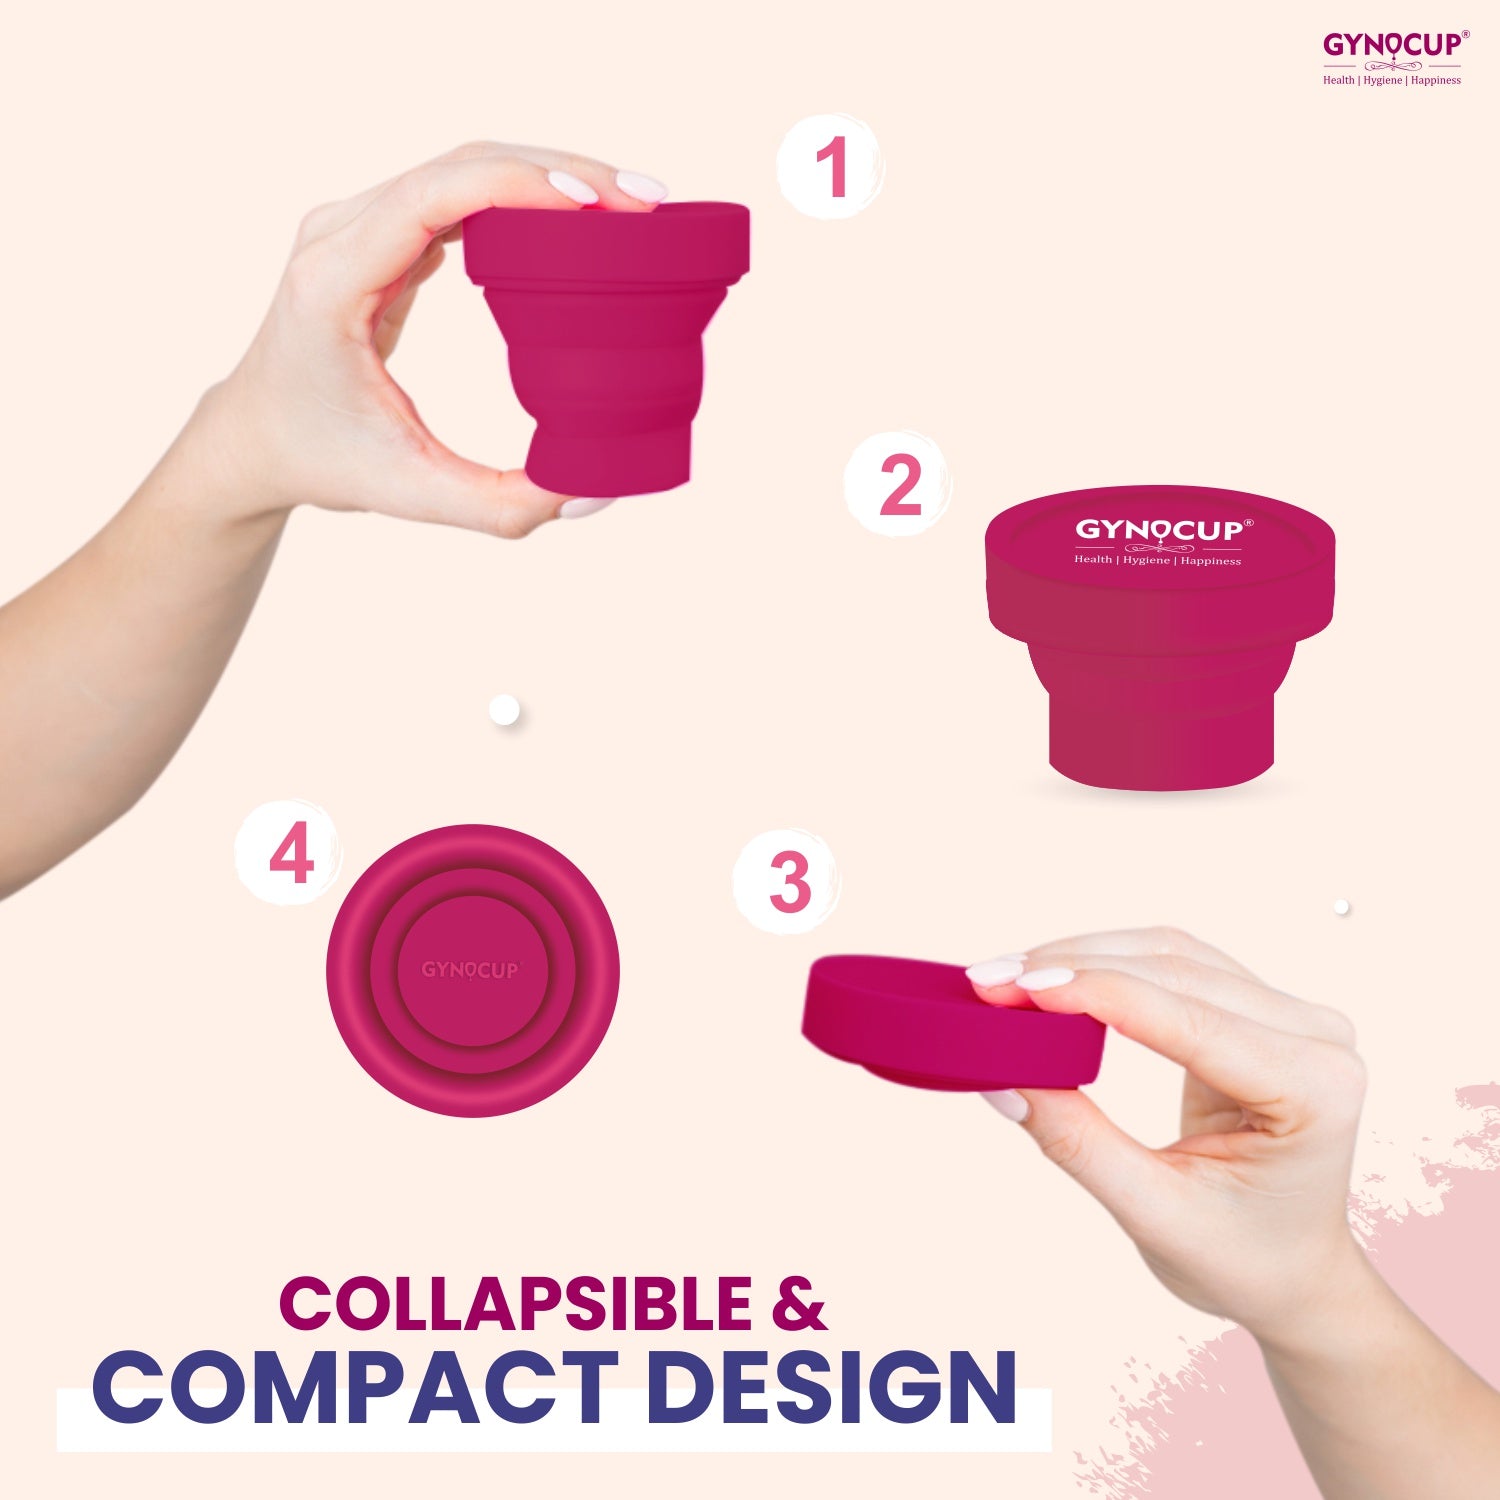 Gynocup Collapsible Silicone Cup Menstrual Cup Sterilizer | Kills 99% of Germs in 2 Minutes | Microwave Friendly - 1 Unit